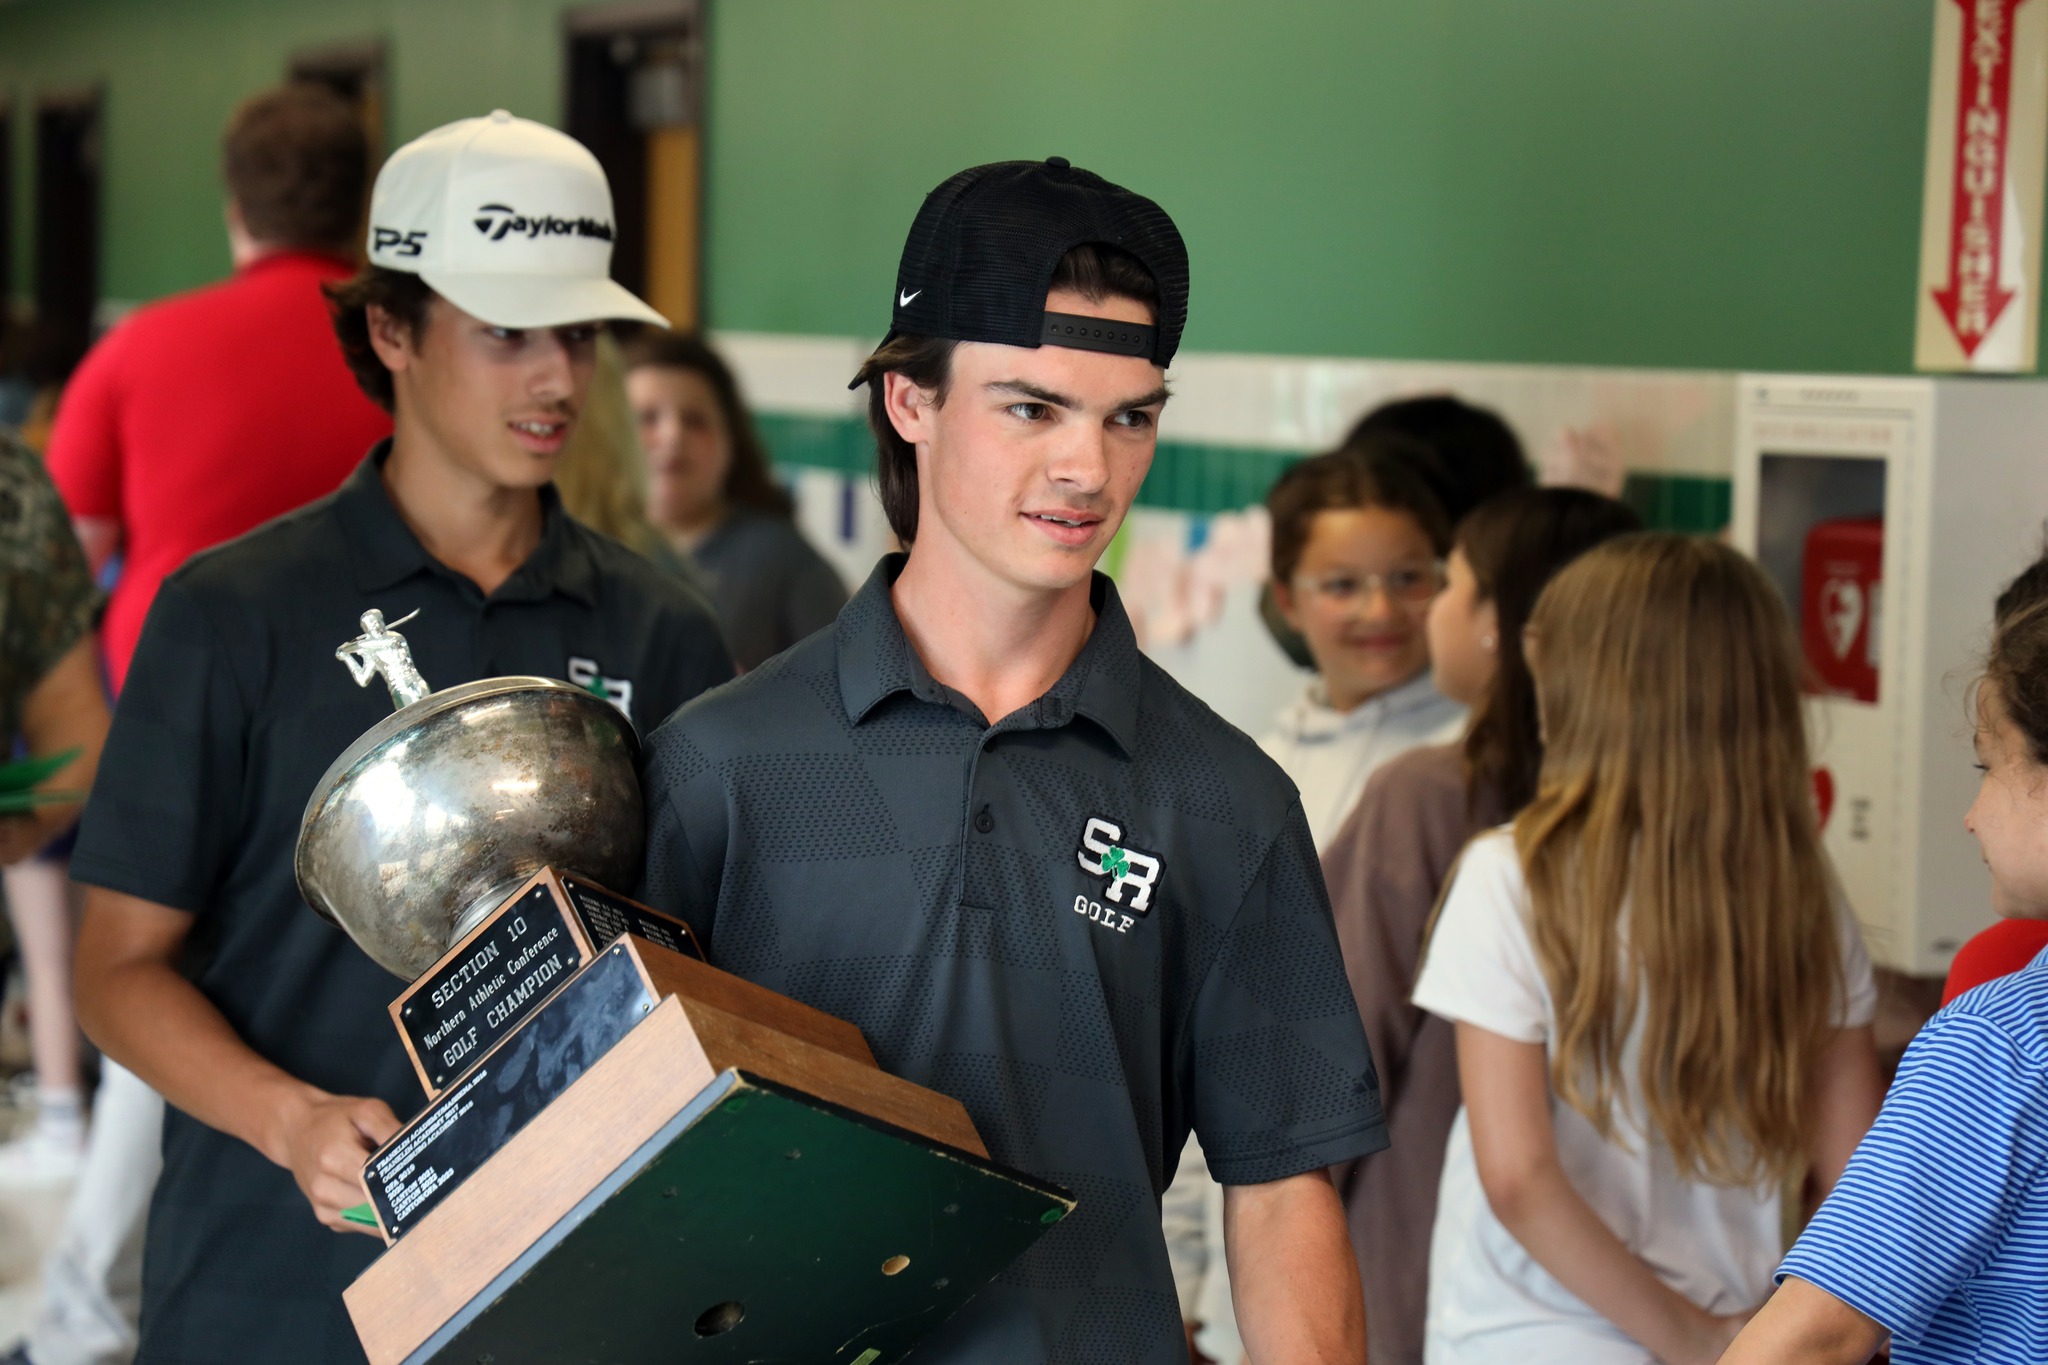 A golf athlete walks through the halls carrying a large trophy